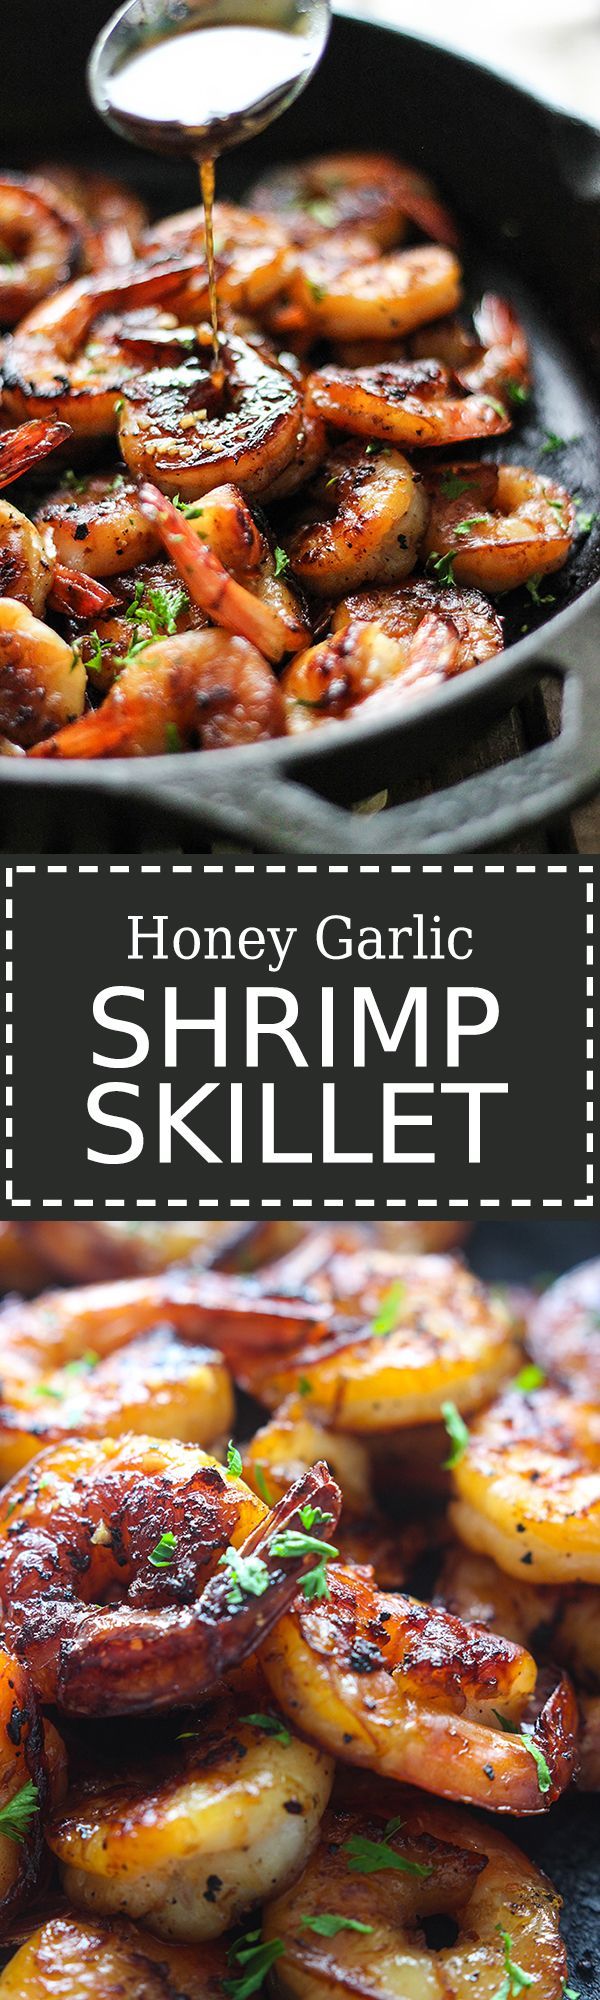 This smoky and sweet honey garlic shrimp skillet is super easy with only five ingredients and cooked in less than 15 minutes!